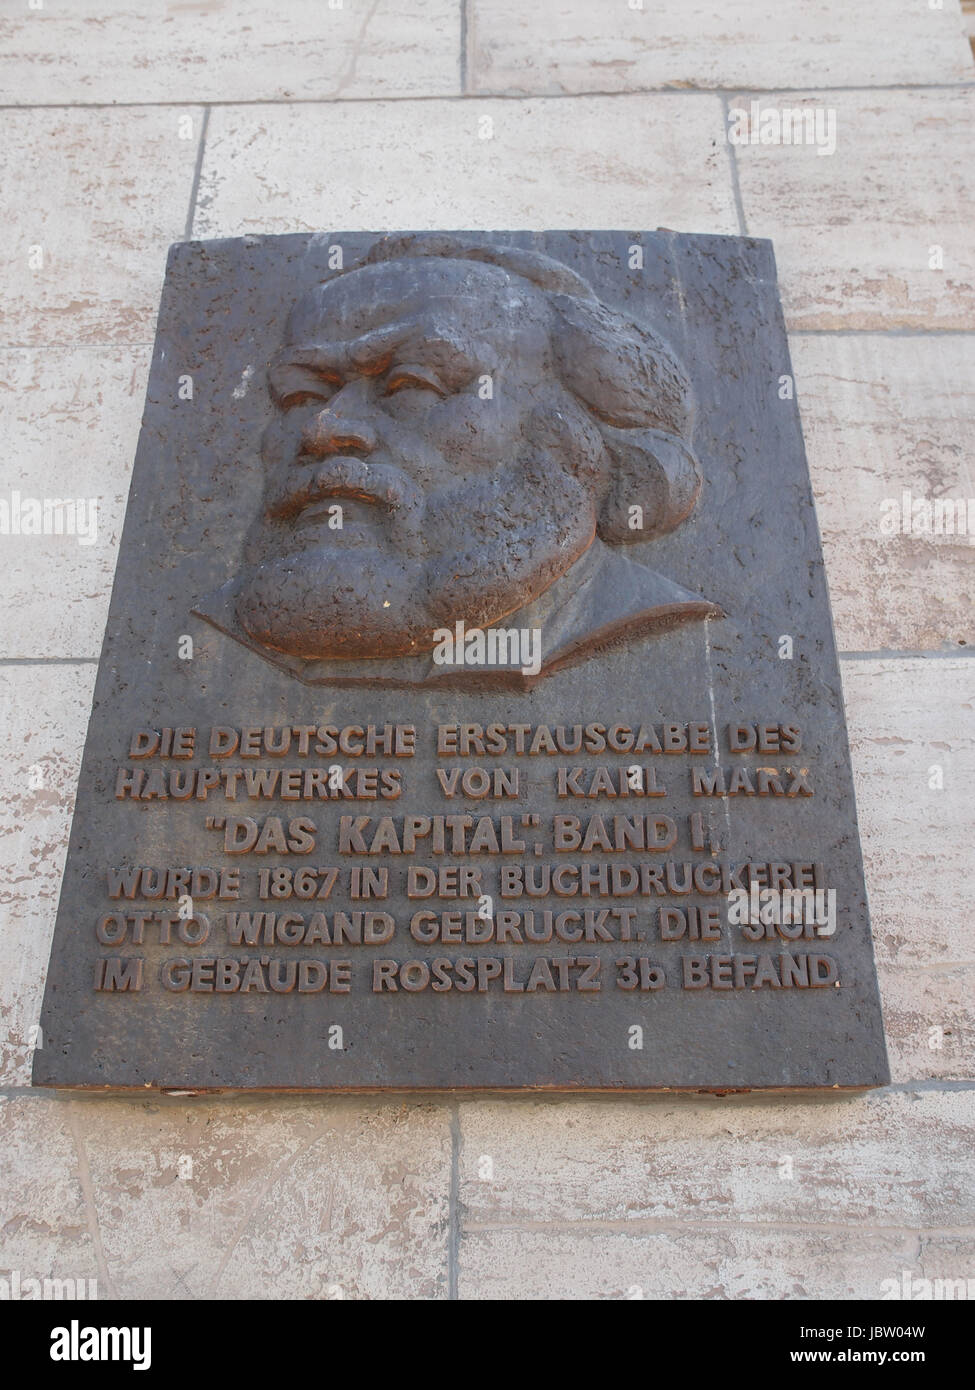 LEIPZIG, GERMANY - JUNE 12, 2014: Commemorative plaque for the printing of the first edition of Karl Marx Das Kapital Capital in 1867 in Leipzig Stock Photo